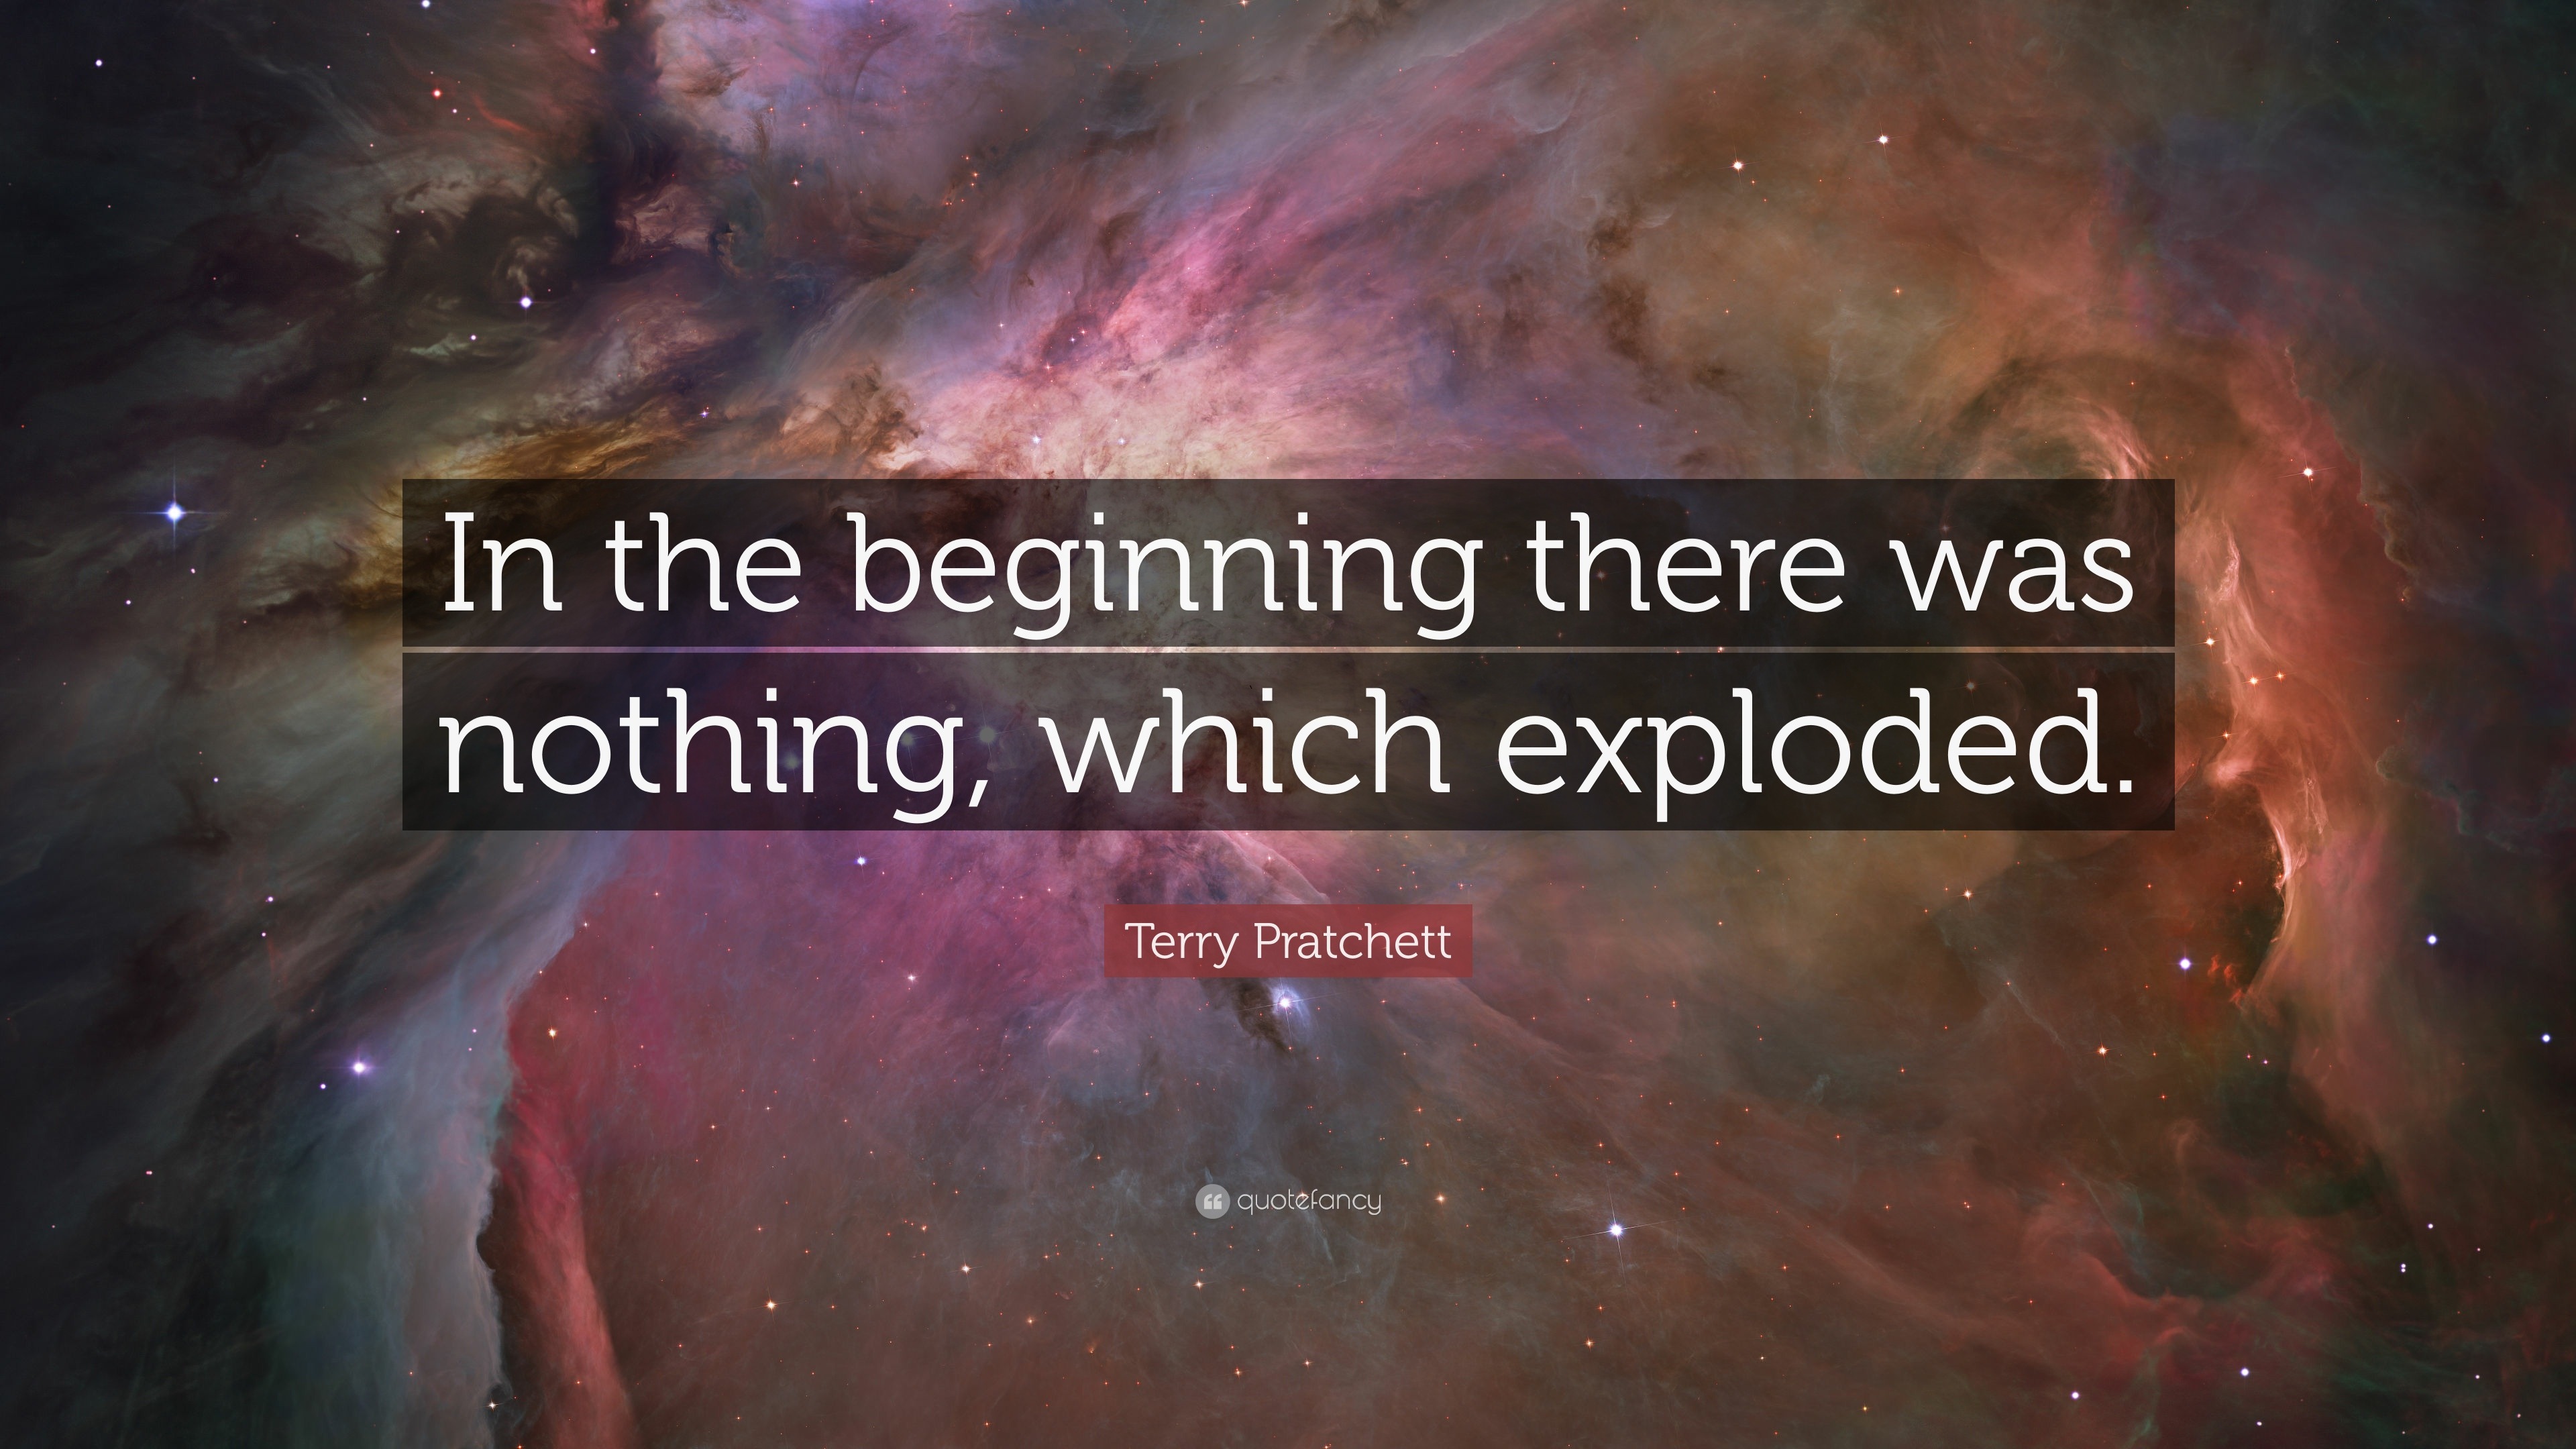 Terry Pratchett Quote: “In the beginning there was nothing, which exploded.”